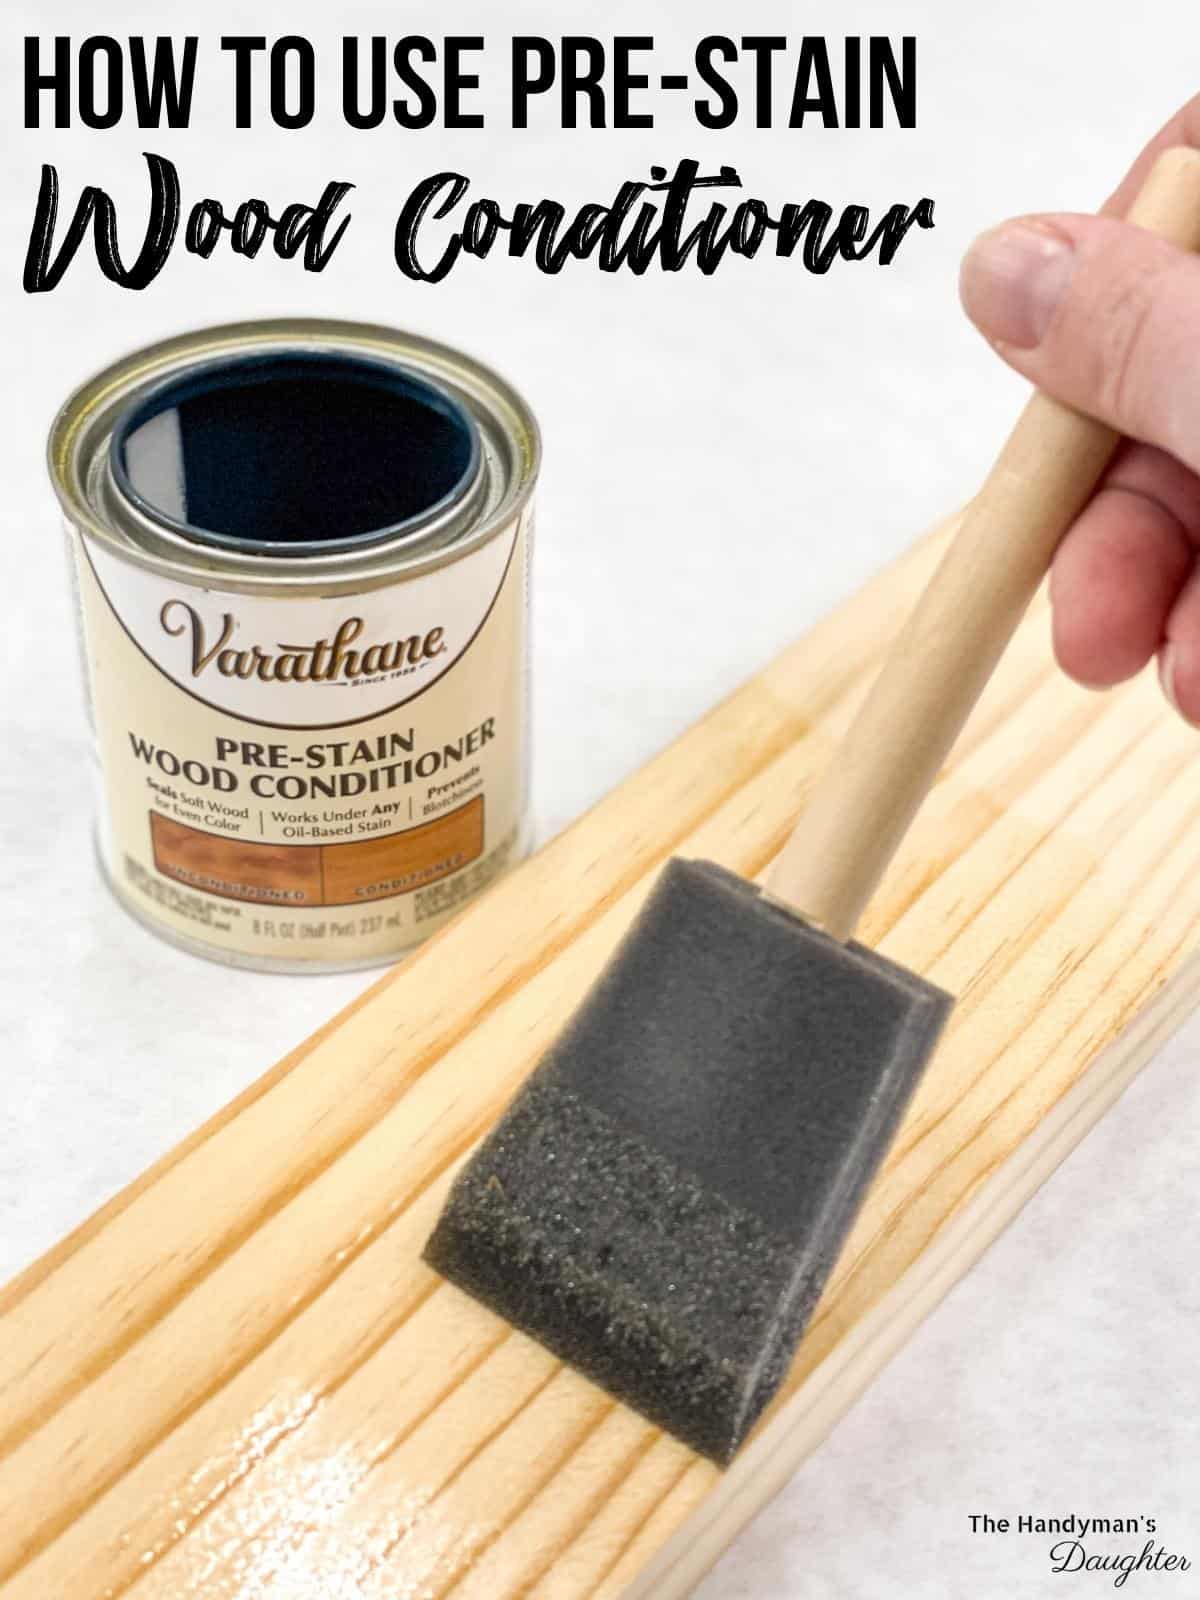 How to use pre-stain wood conditioner